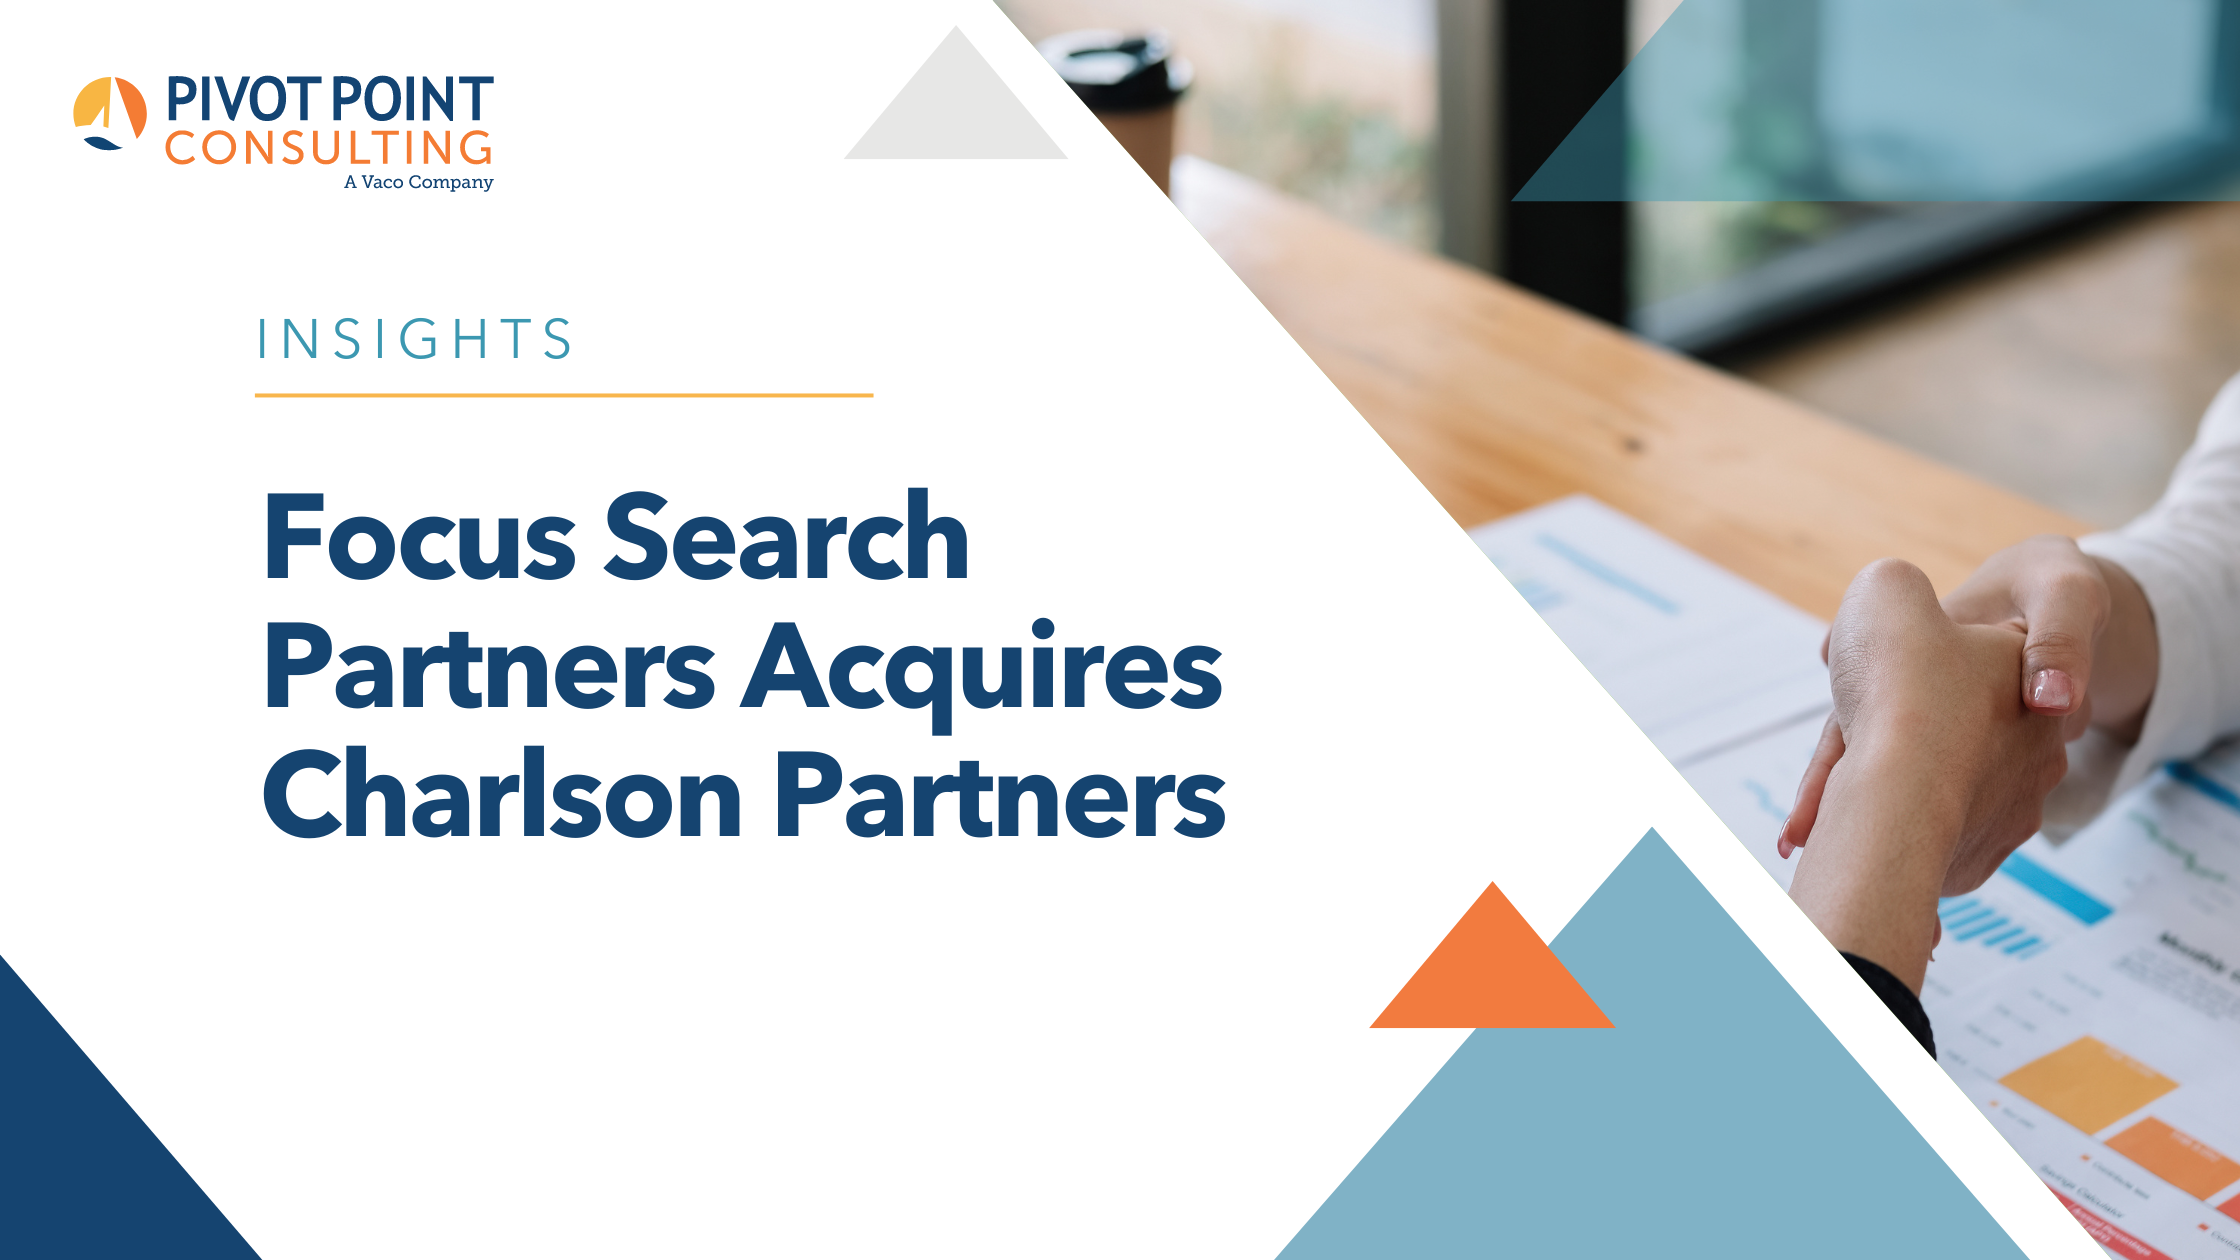 Focus Search Partners Acquires Charlson Partners blog post